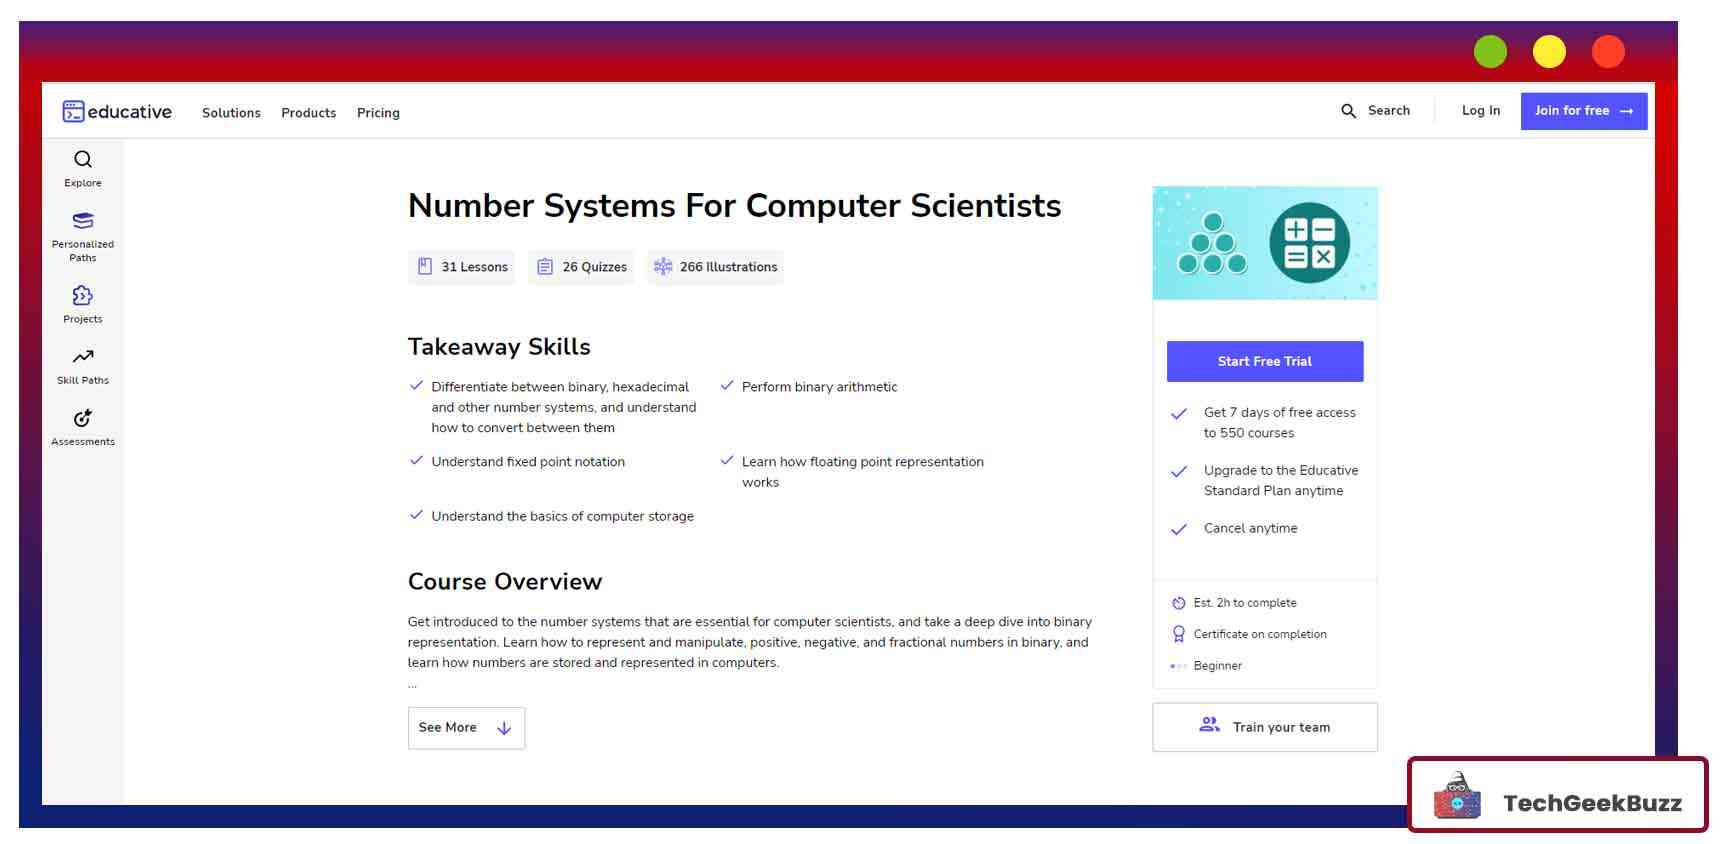 Number Systems For Computer Scientists